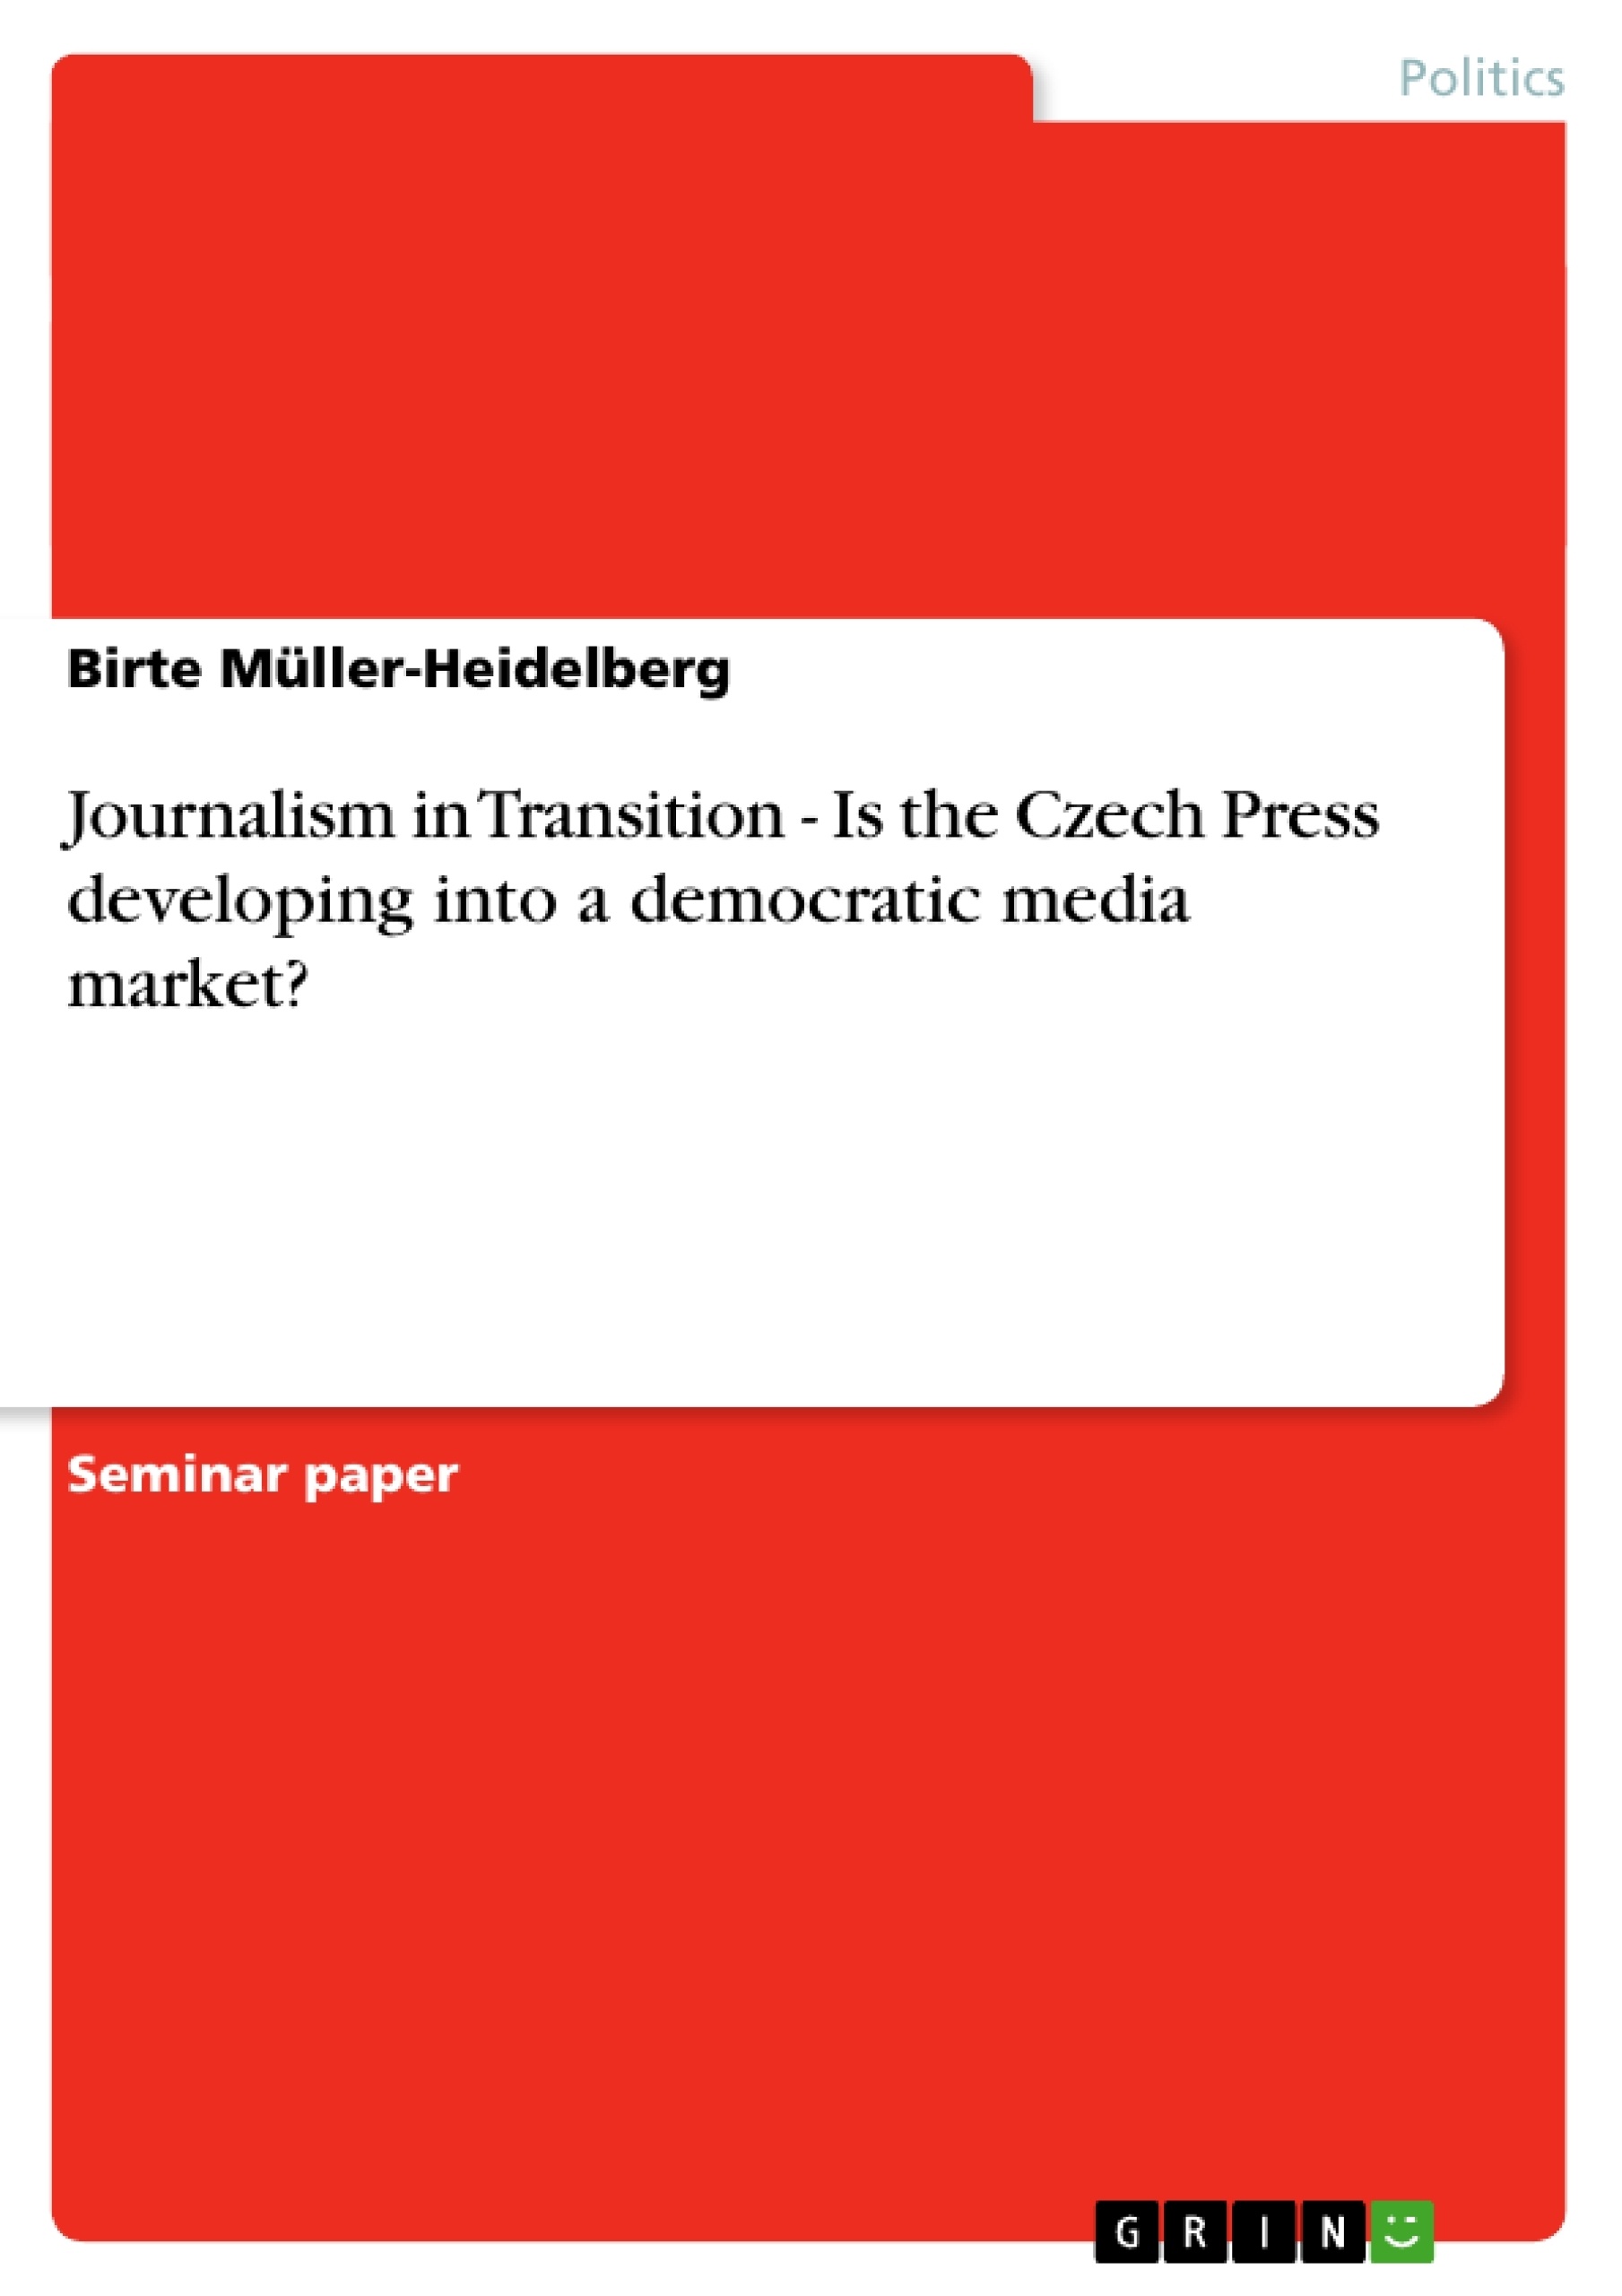 Titel: Journalism in Transition - Is the Czech Press developing into a democratic media market?